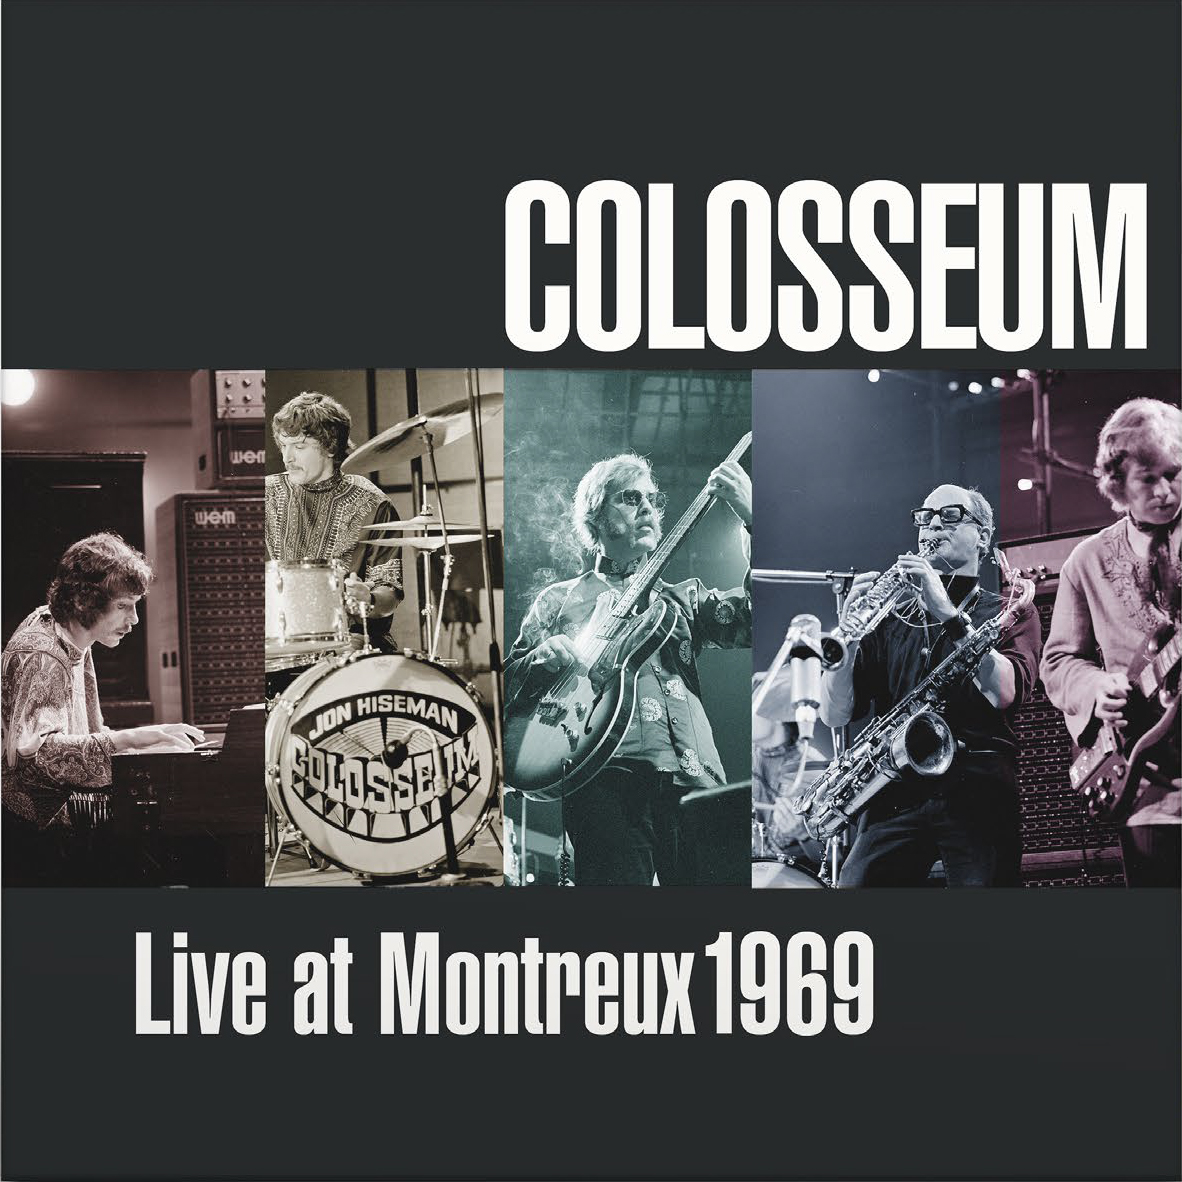 Live at Montreux 1969 CD/DVD